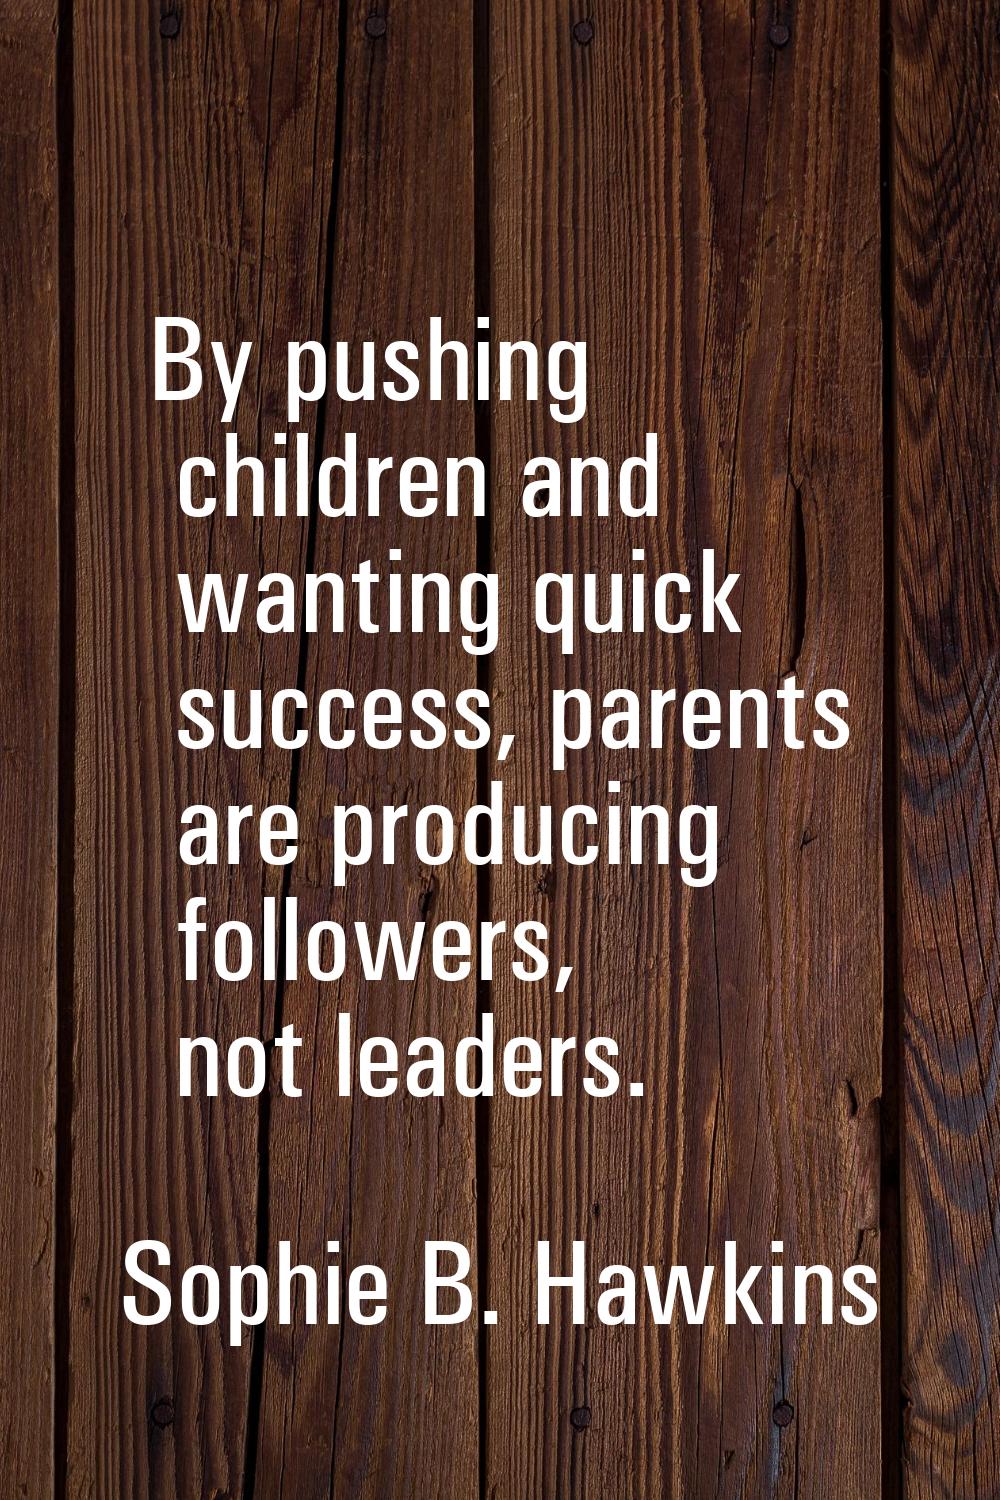 By pushing children and wanting quick success, parents are producing followers, not leaders.